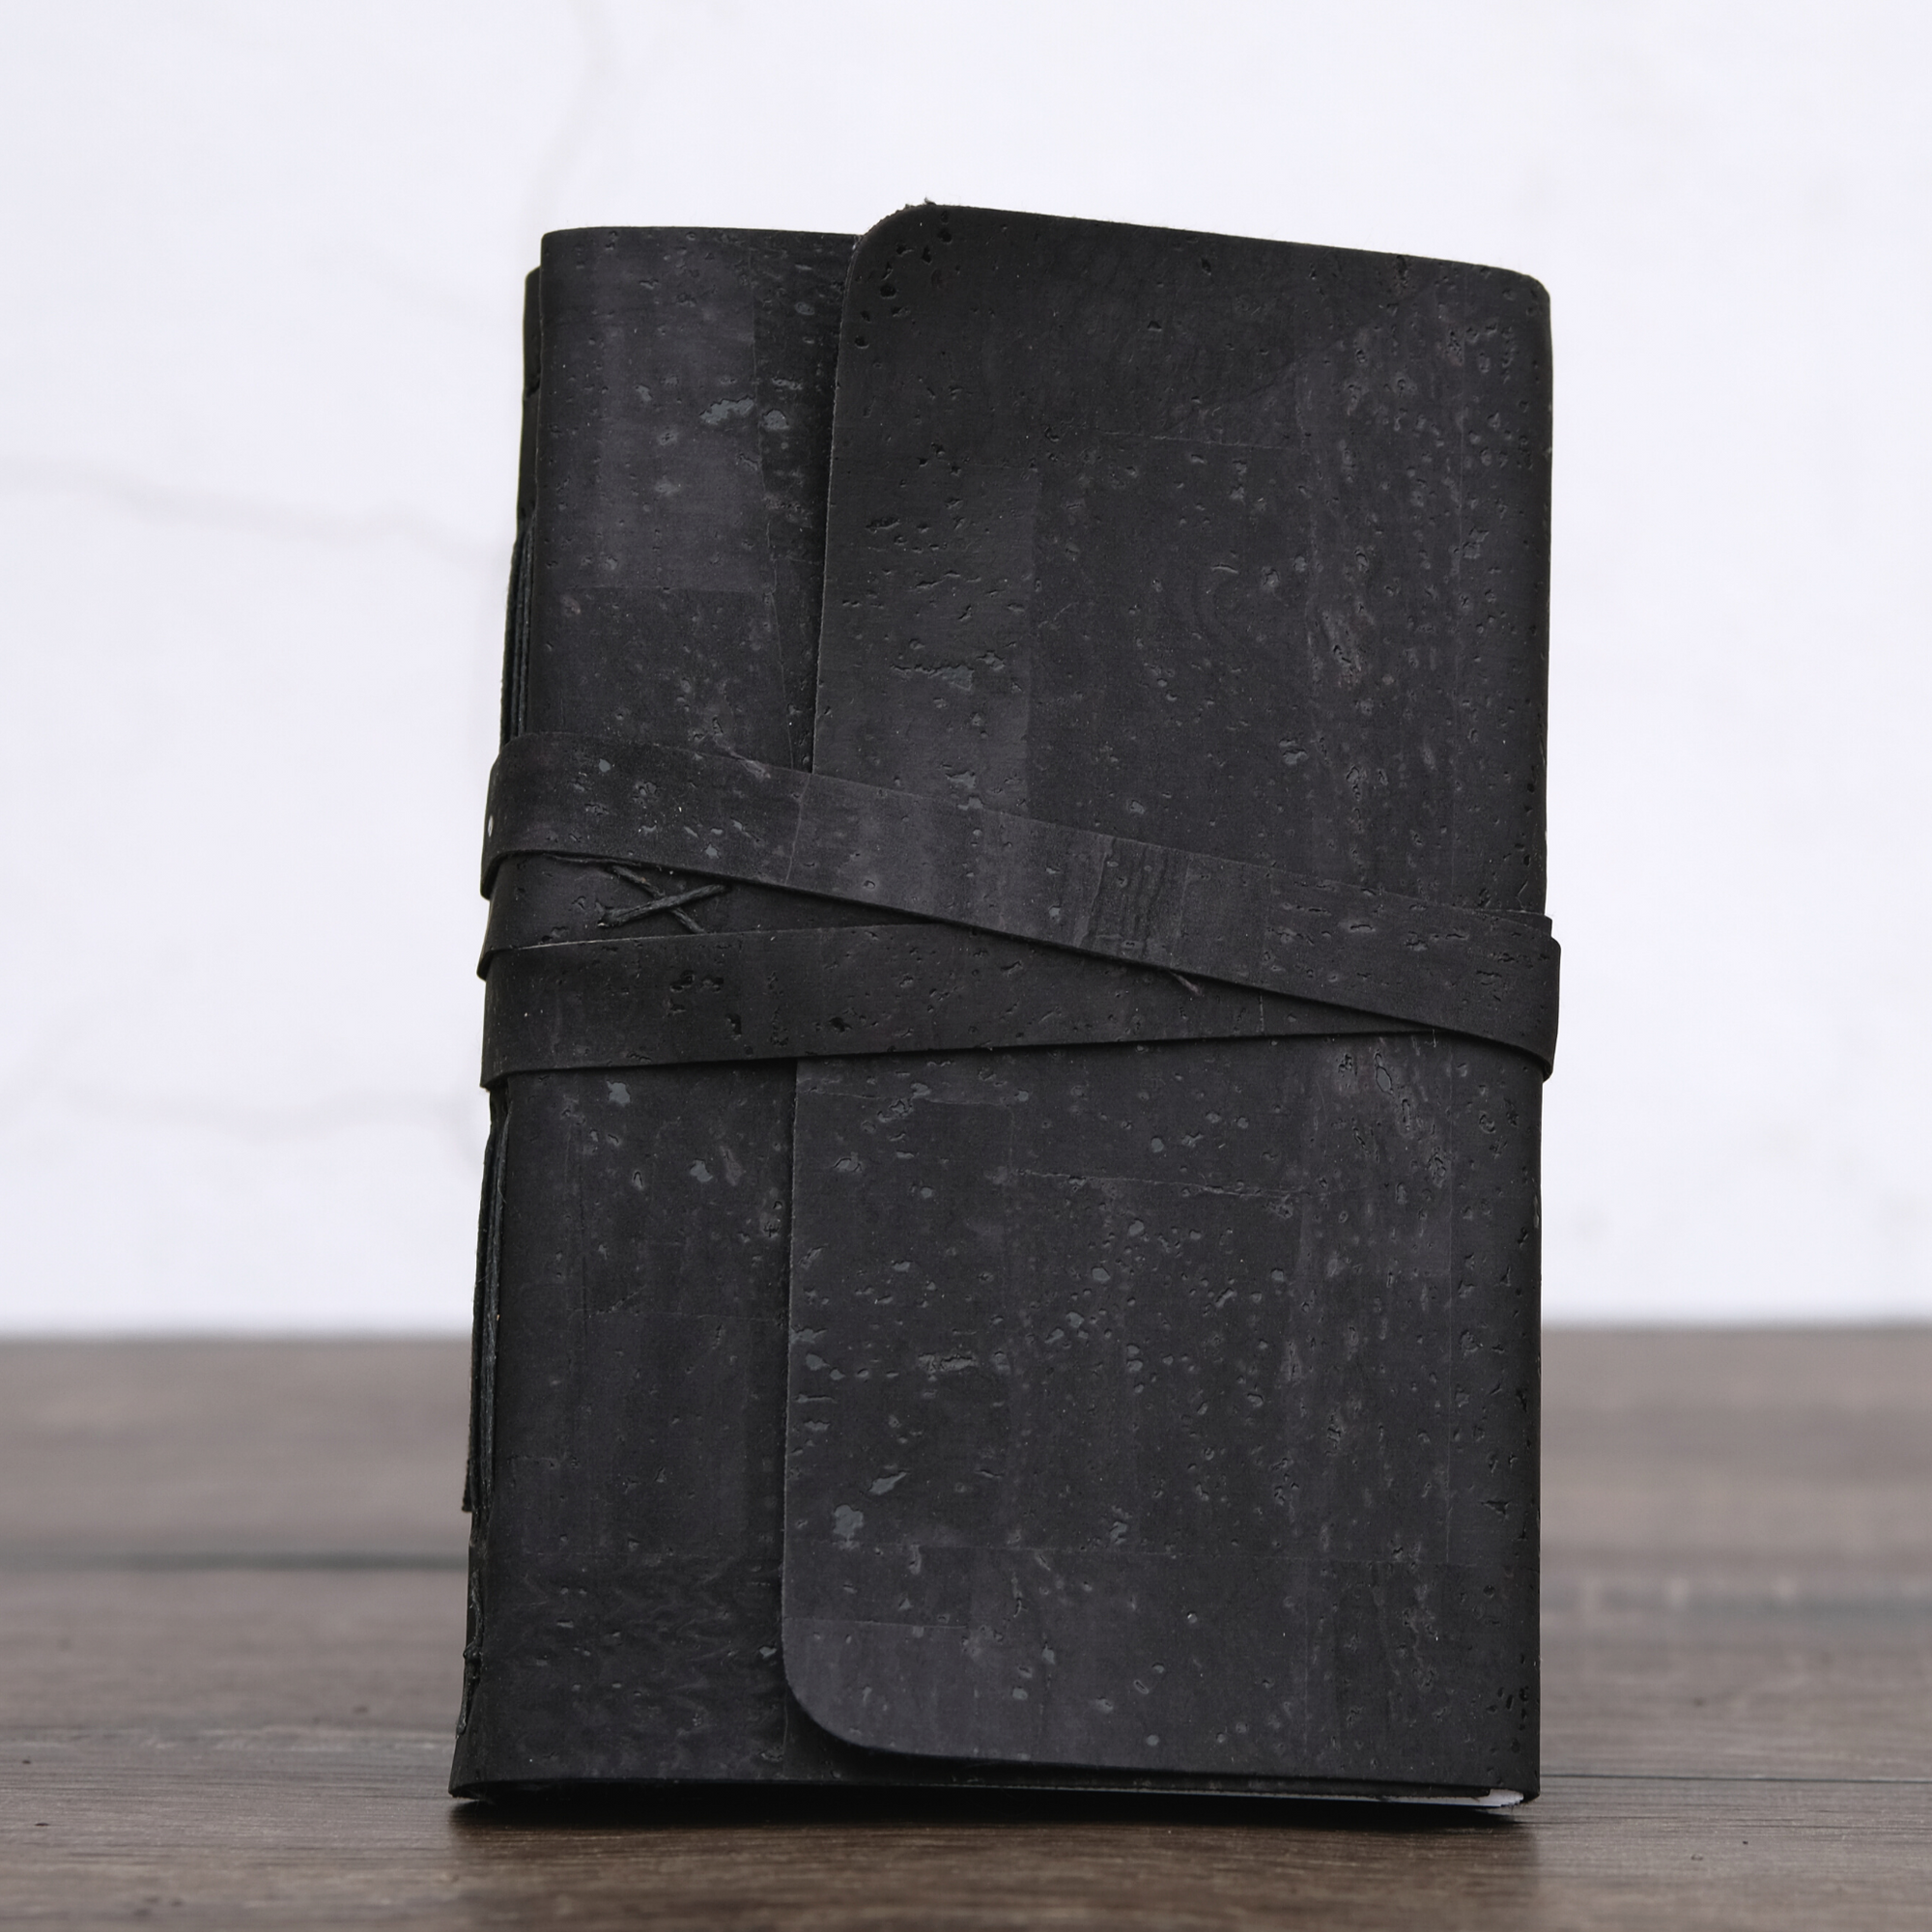 Recipe Journal Embossed with RECIPES covered with Vegan Black